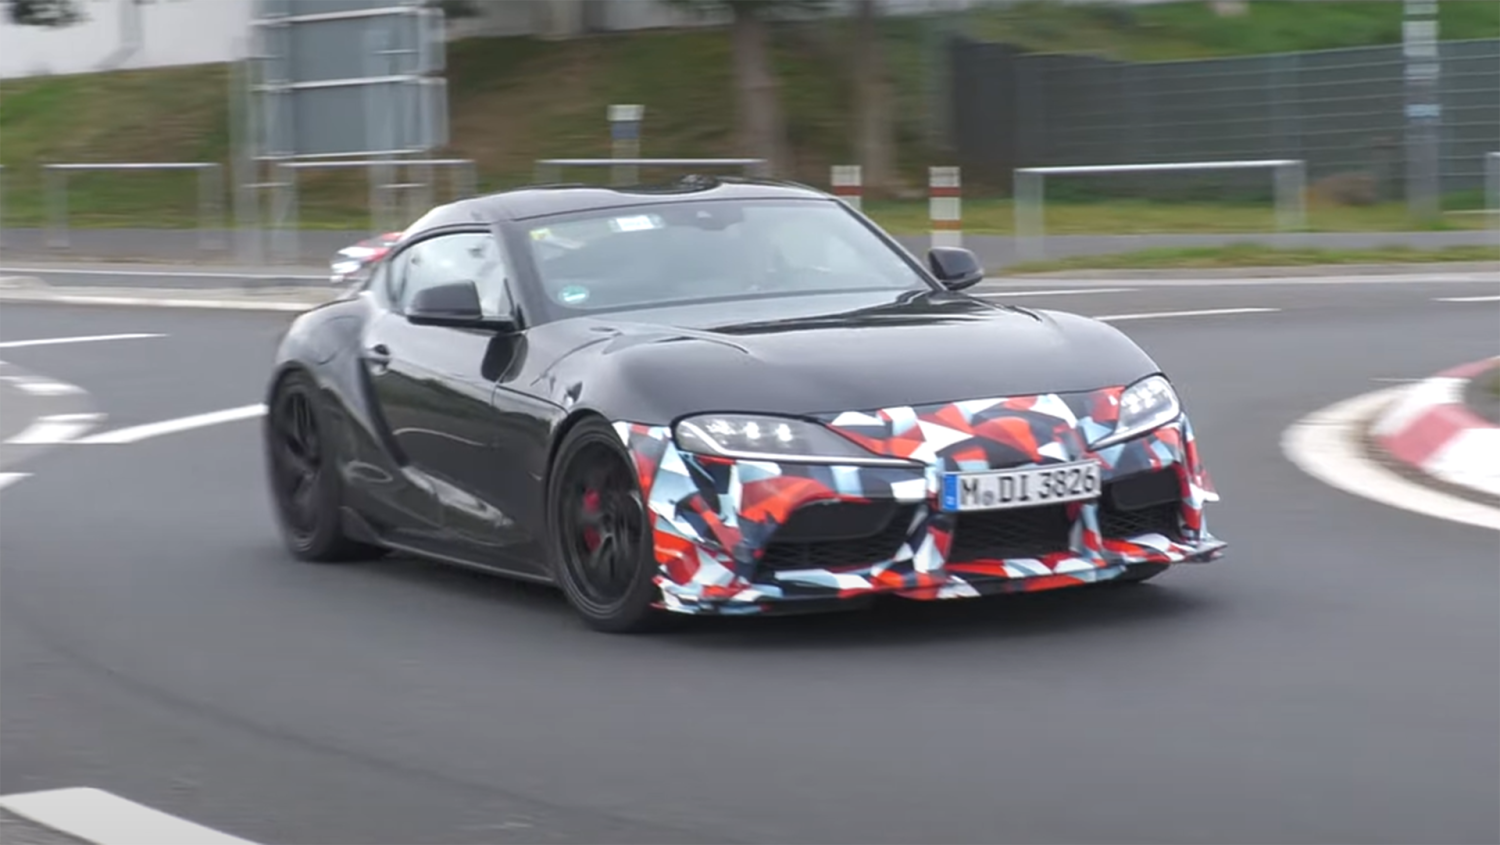 Toyota Supra GRMN On The Way With An M3 Engine And A Manual